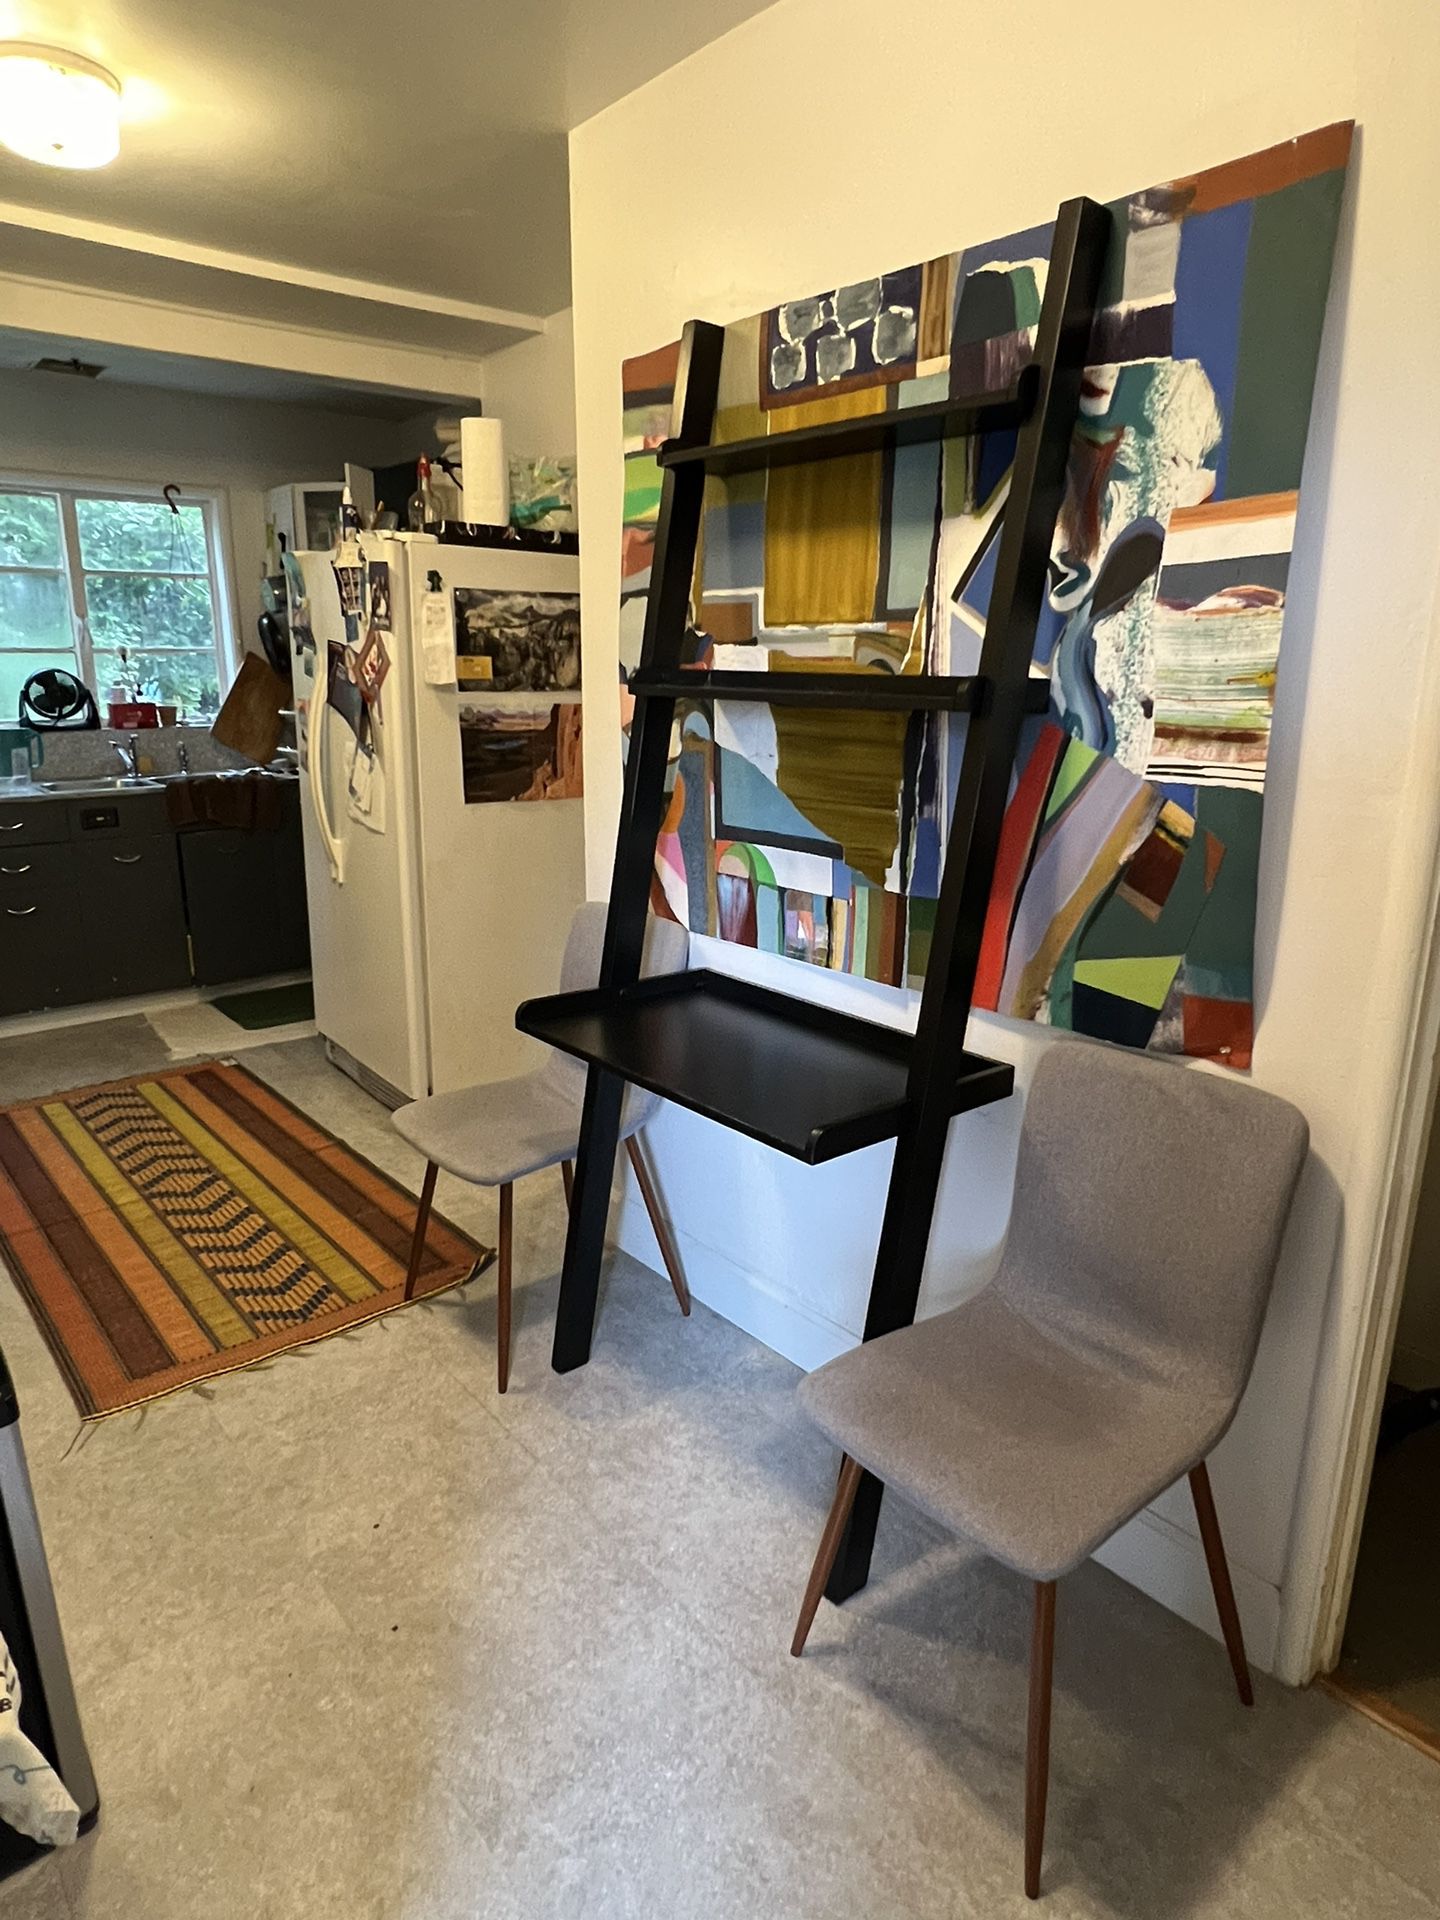 Leaning desk with shelves